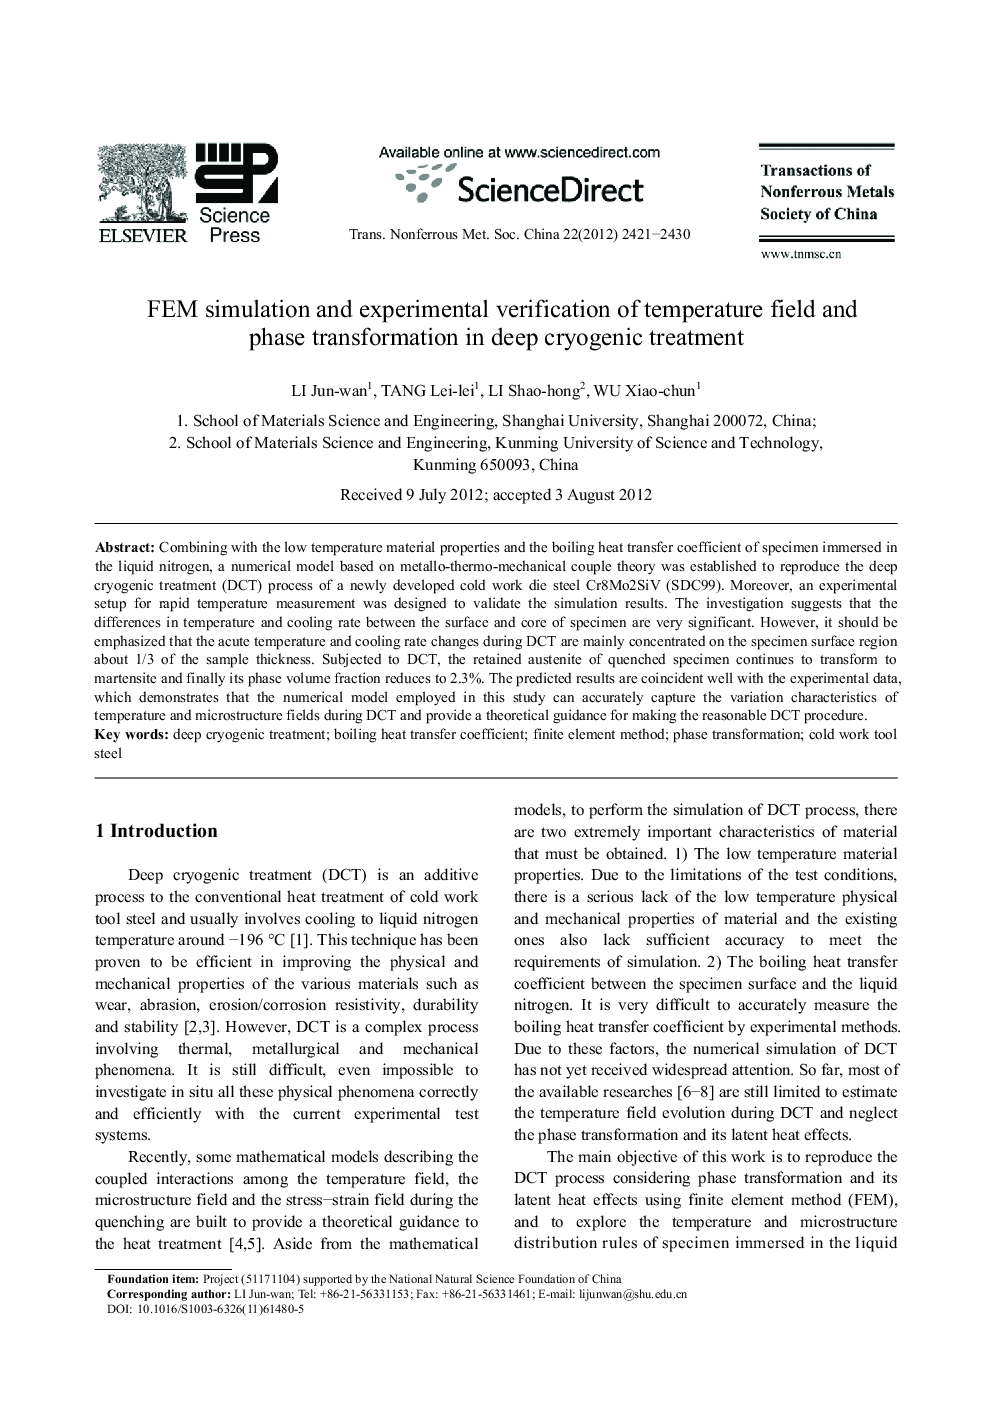 FEM simulation and experimental verification of temperature field and phase transformation in deep cryogenic treatment